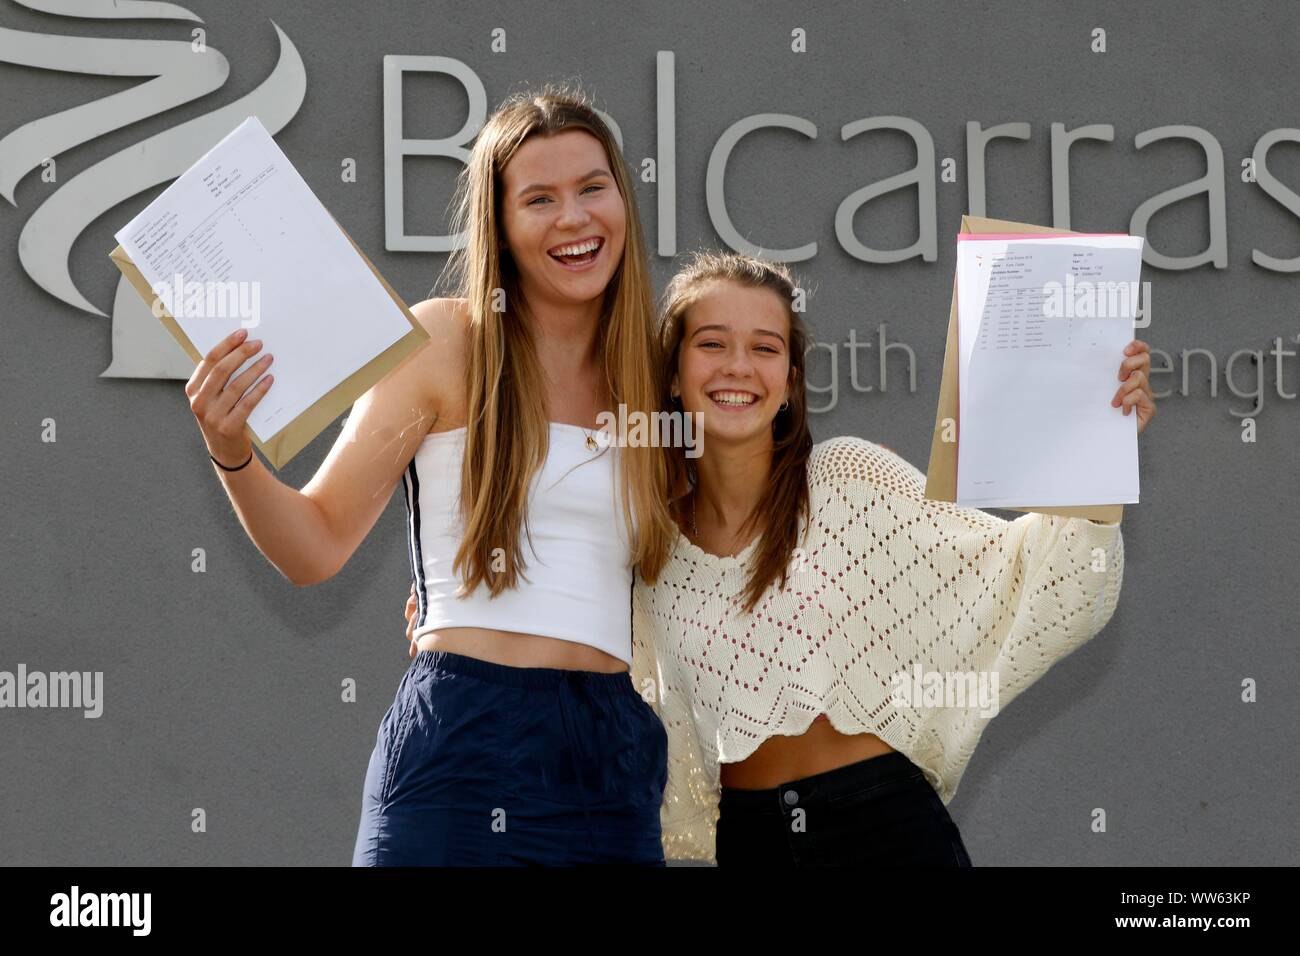 Kate O'Toole, who got five 9 grades and friend Katie Castle, who got three 9 grades, at GCSE results day at Balcarras Academy, Cheltenham. 22/08/2019 Stock Photo